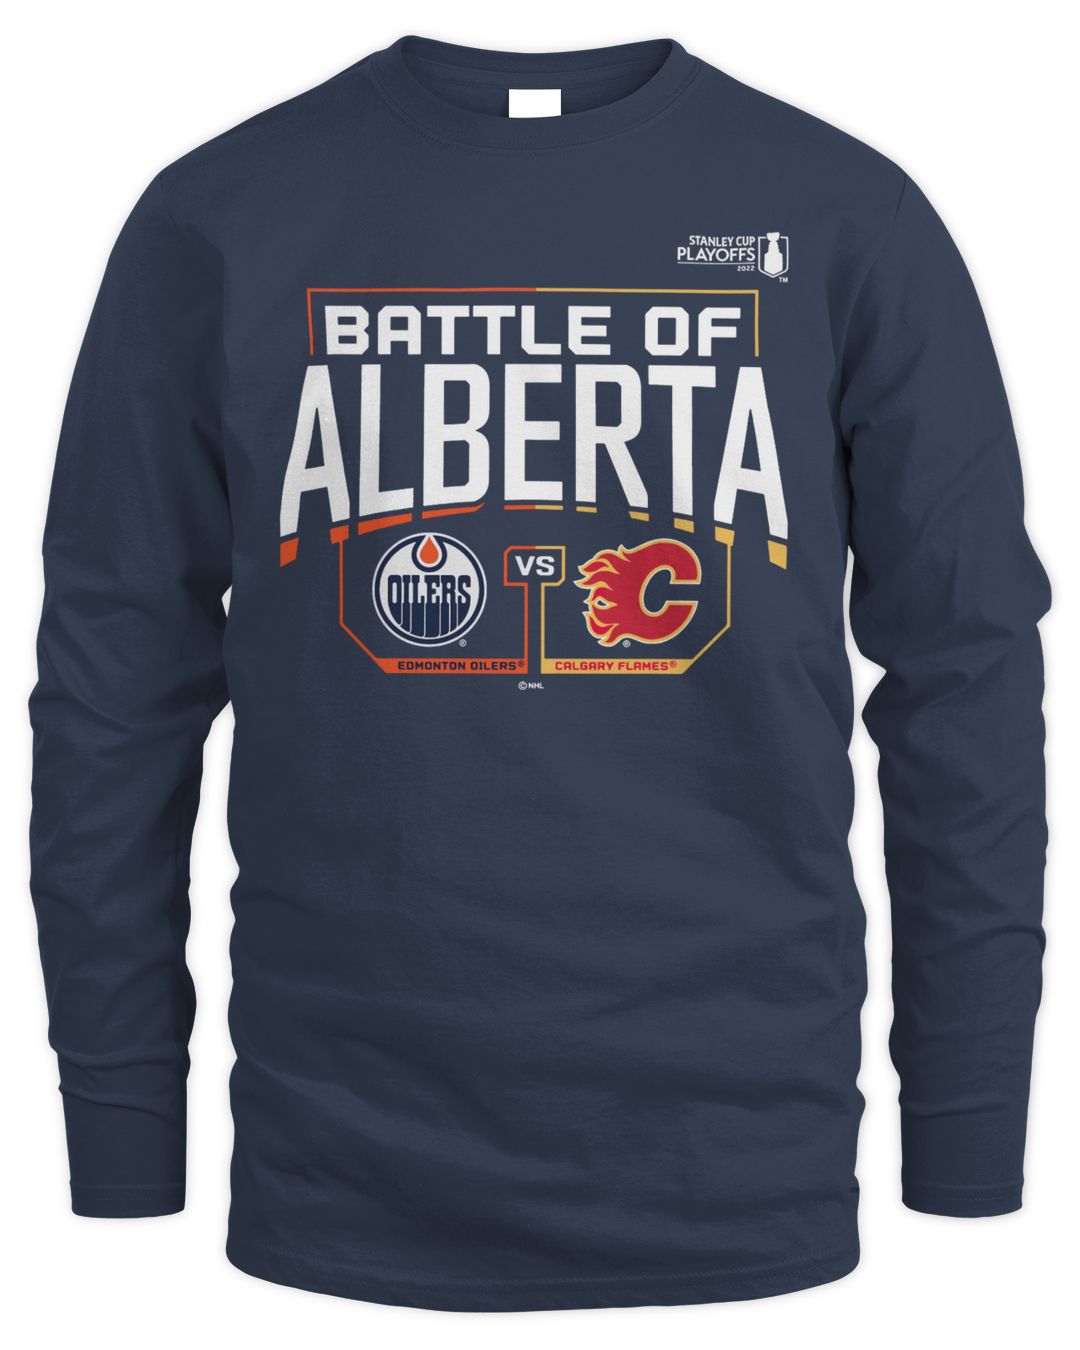 Flames Vs Oilers 2022 Stanley Cup Playoffs Battle of Alberta Shirt